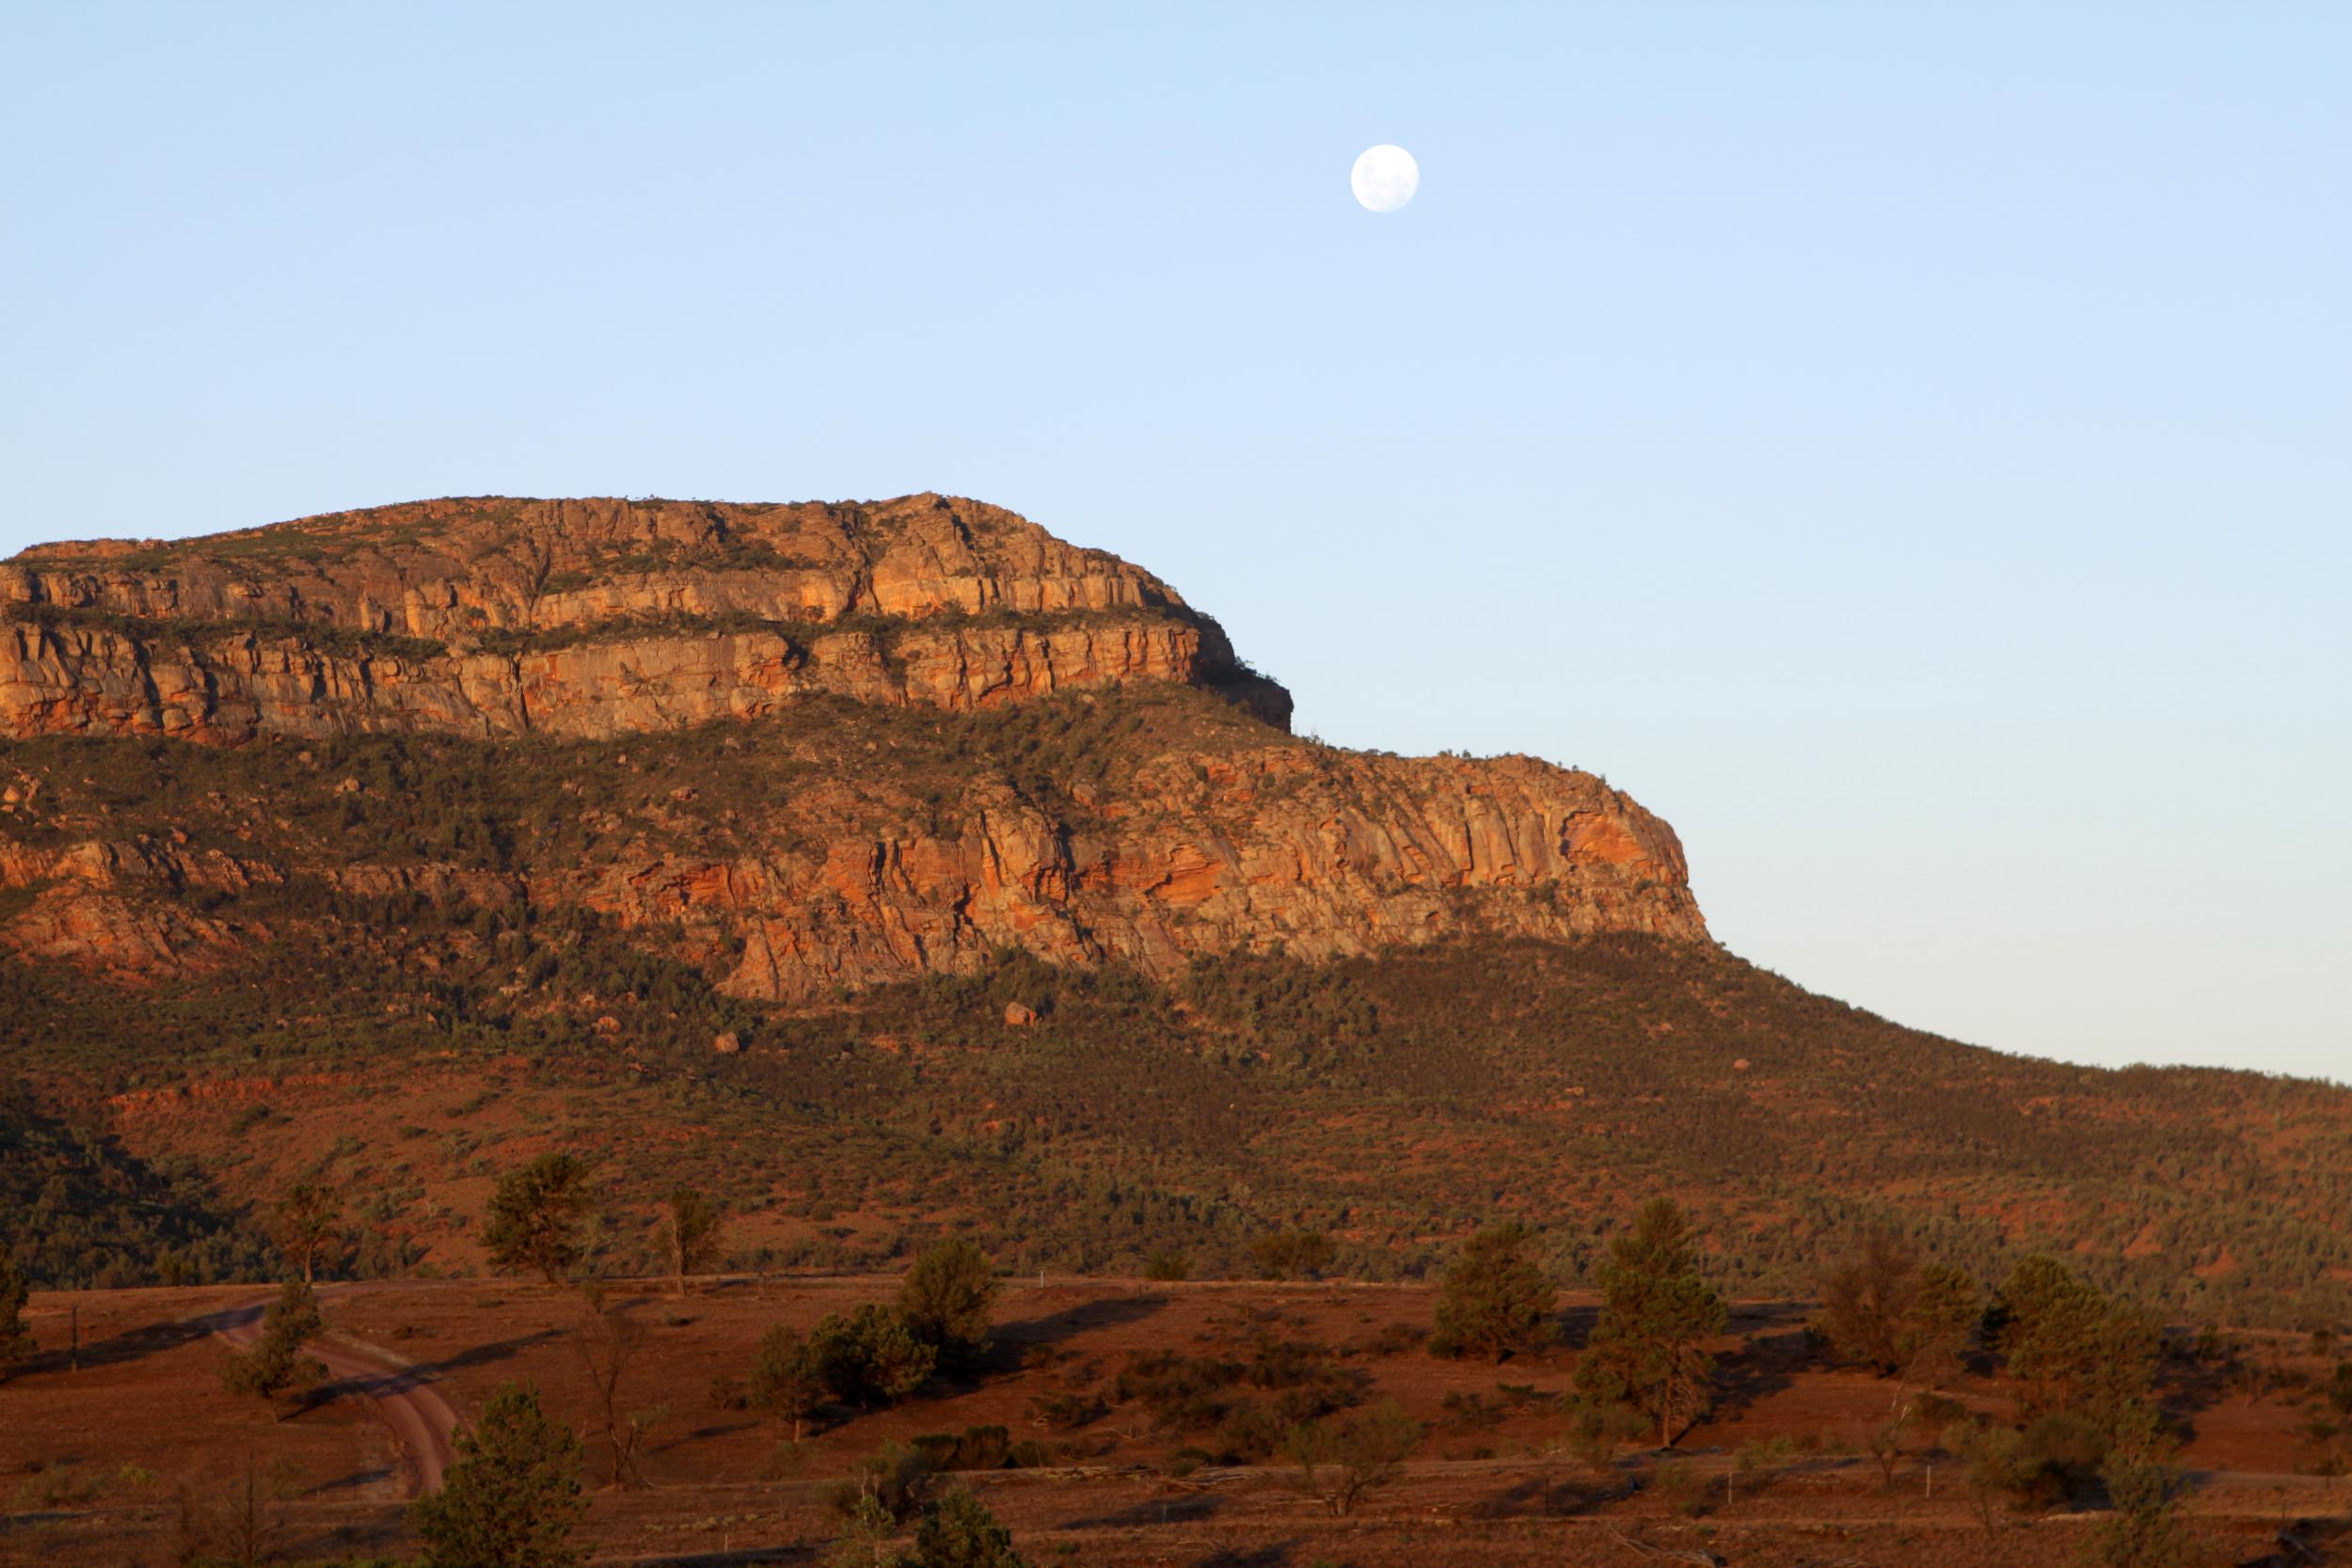 The sunset at Wilpena Pound in South Australia, a natural amphitheatre